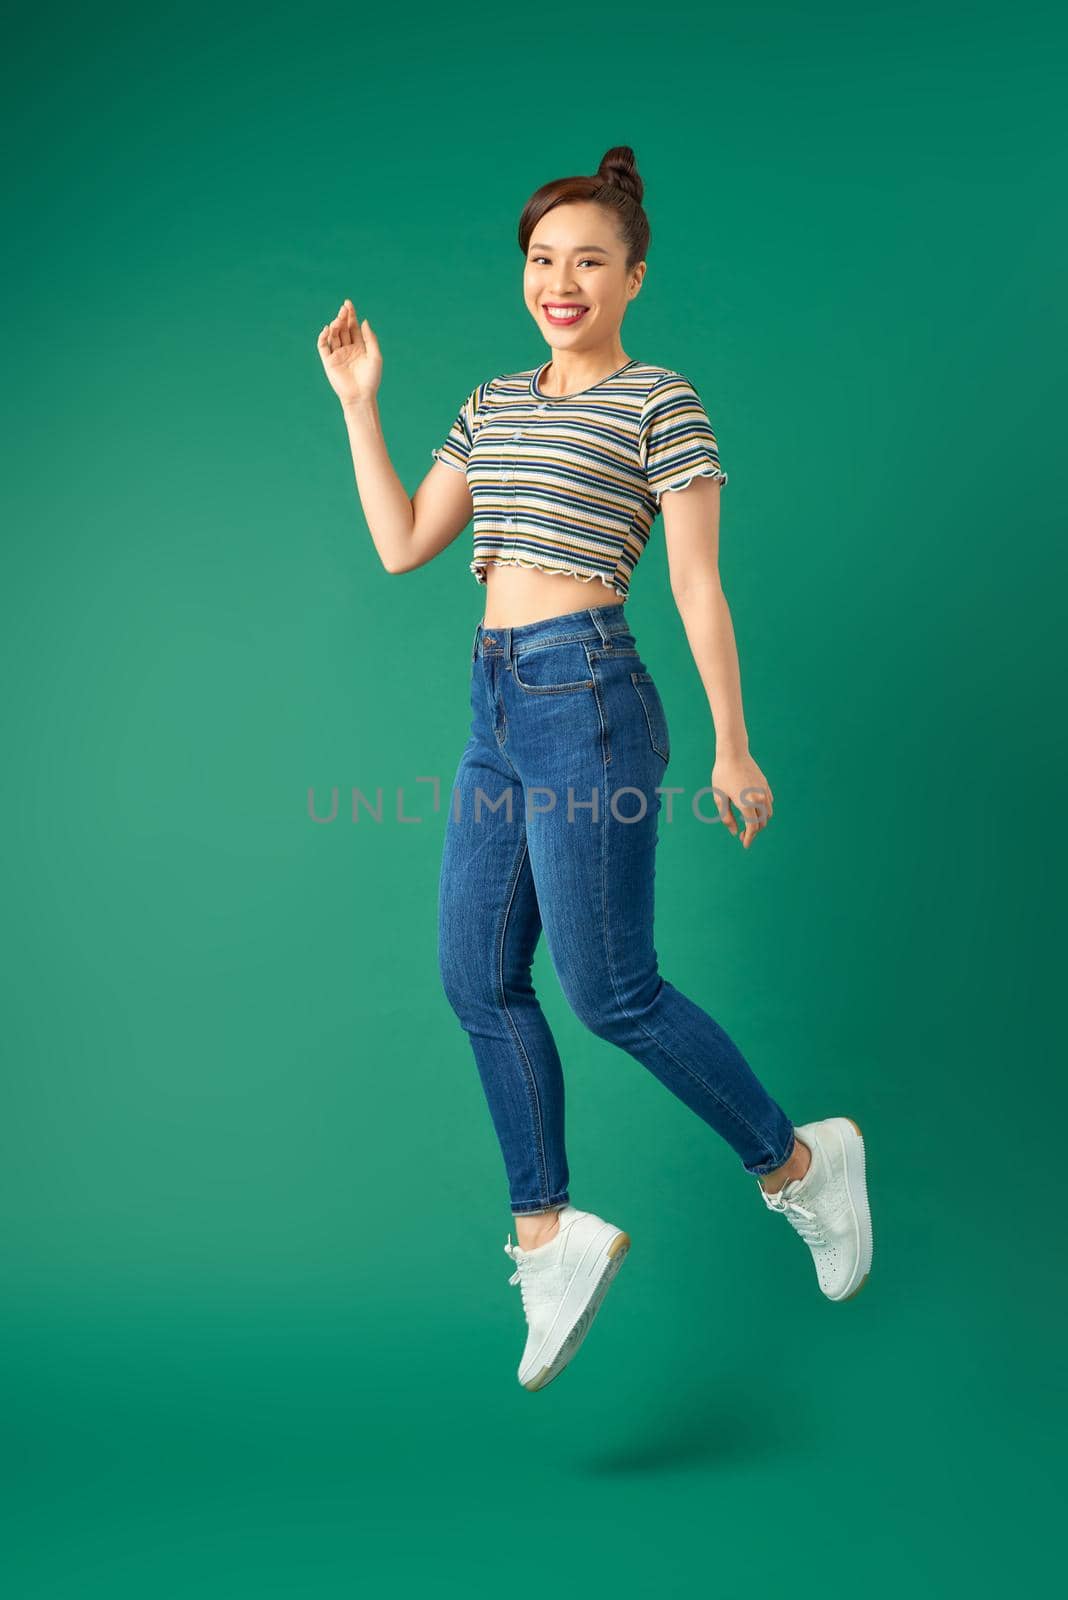 Happy carefree young woman jumping isolated over green background.